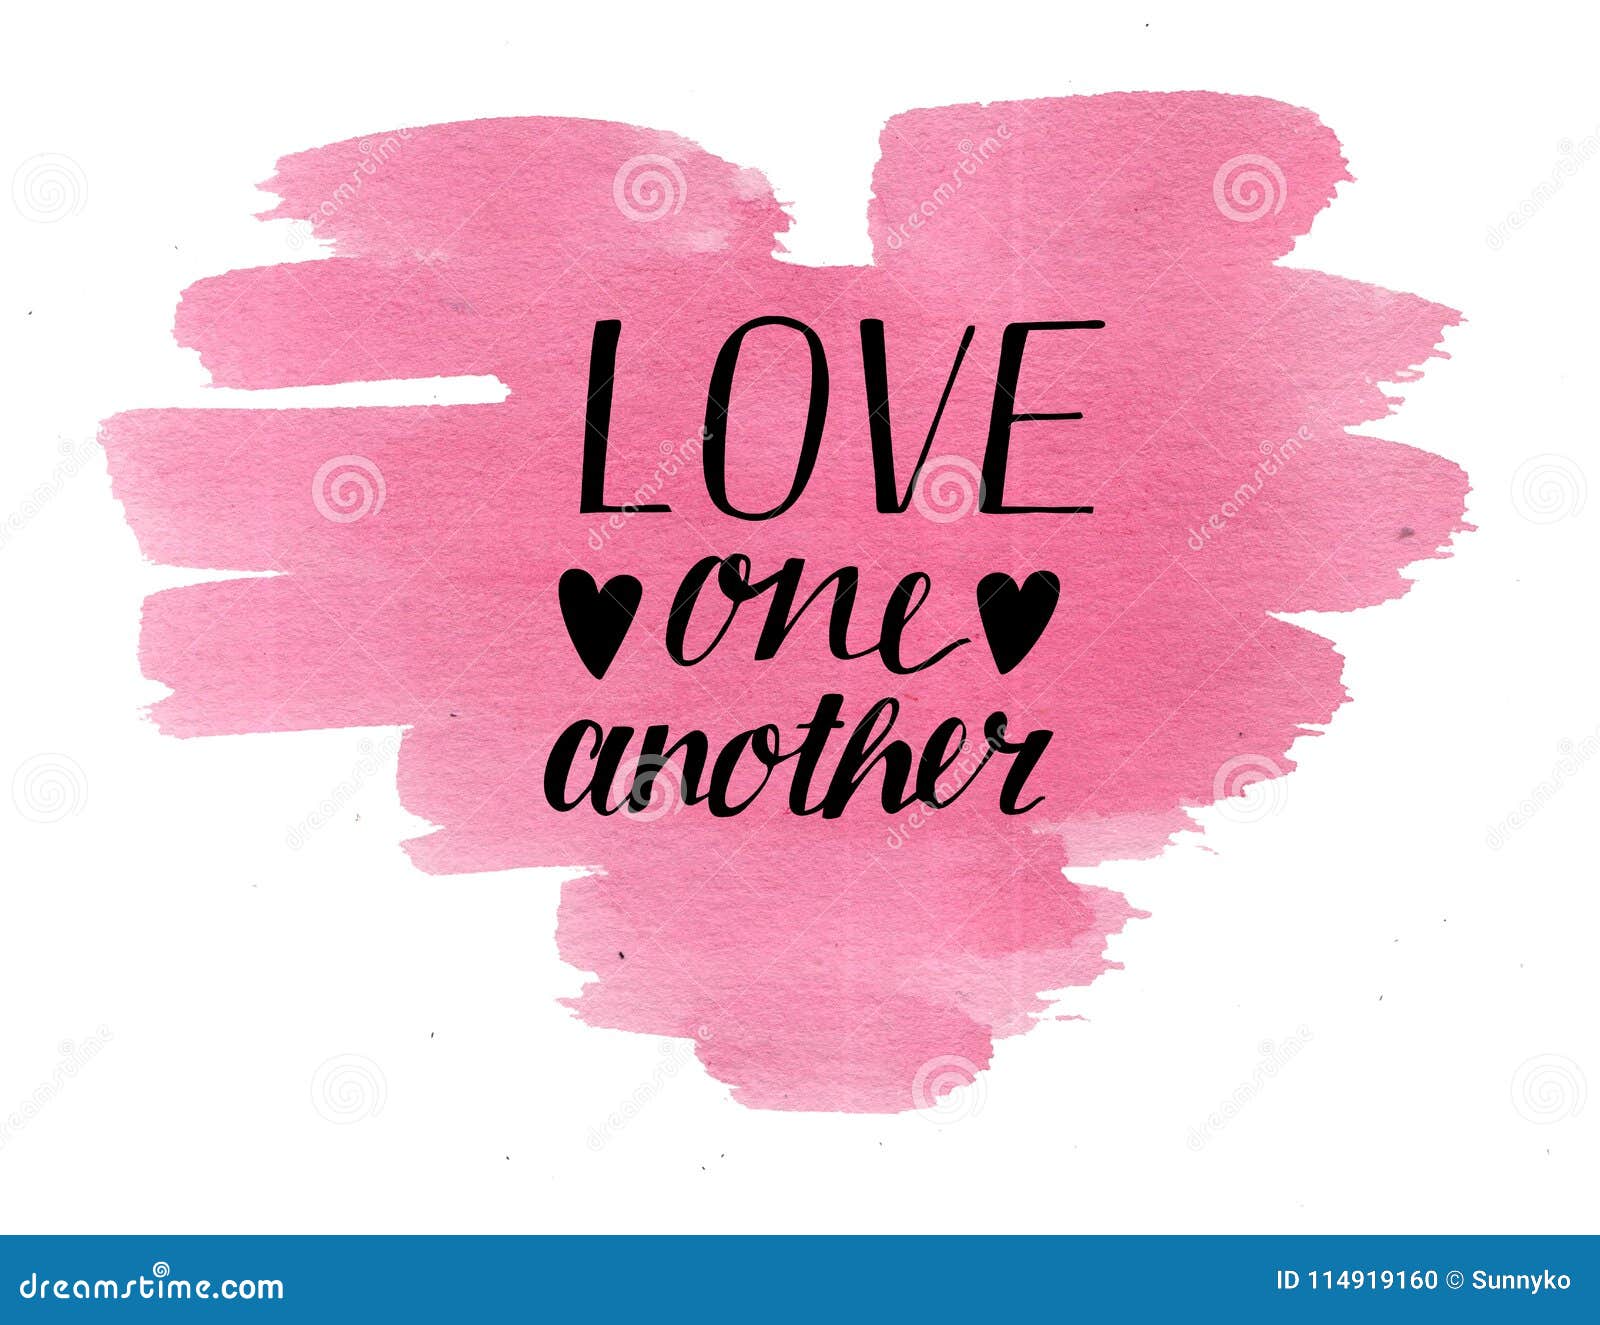 hand lettering love one another on watercolor heart.